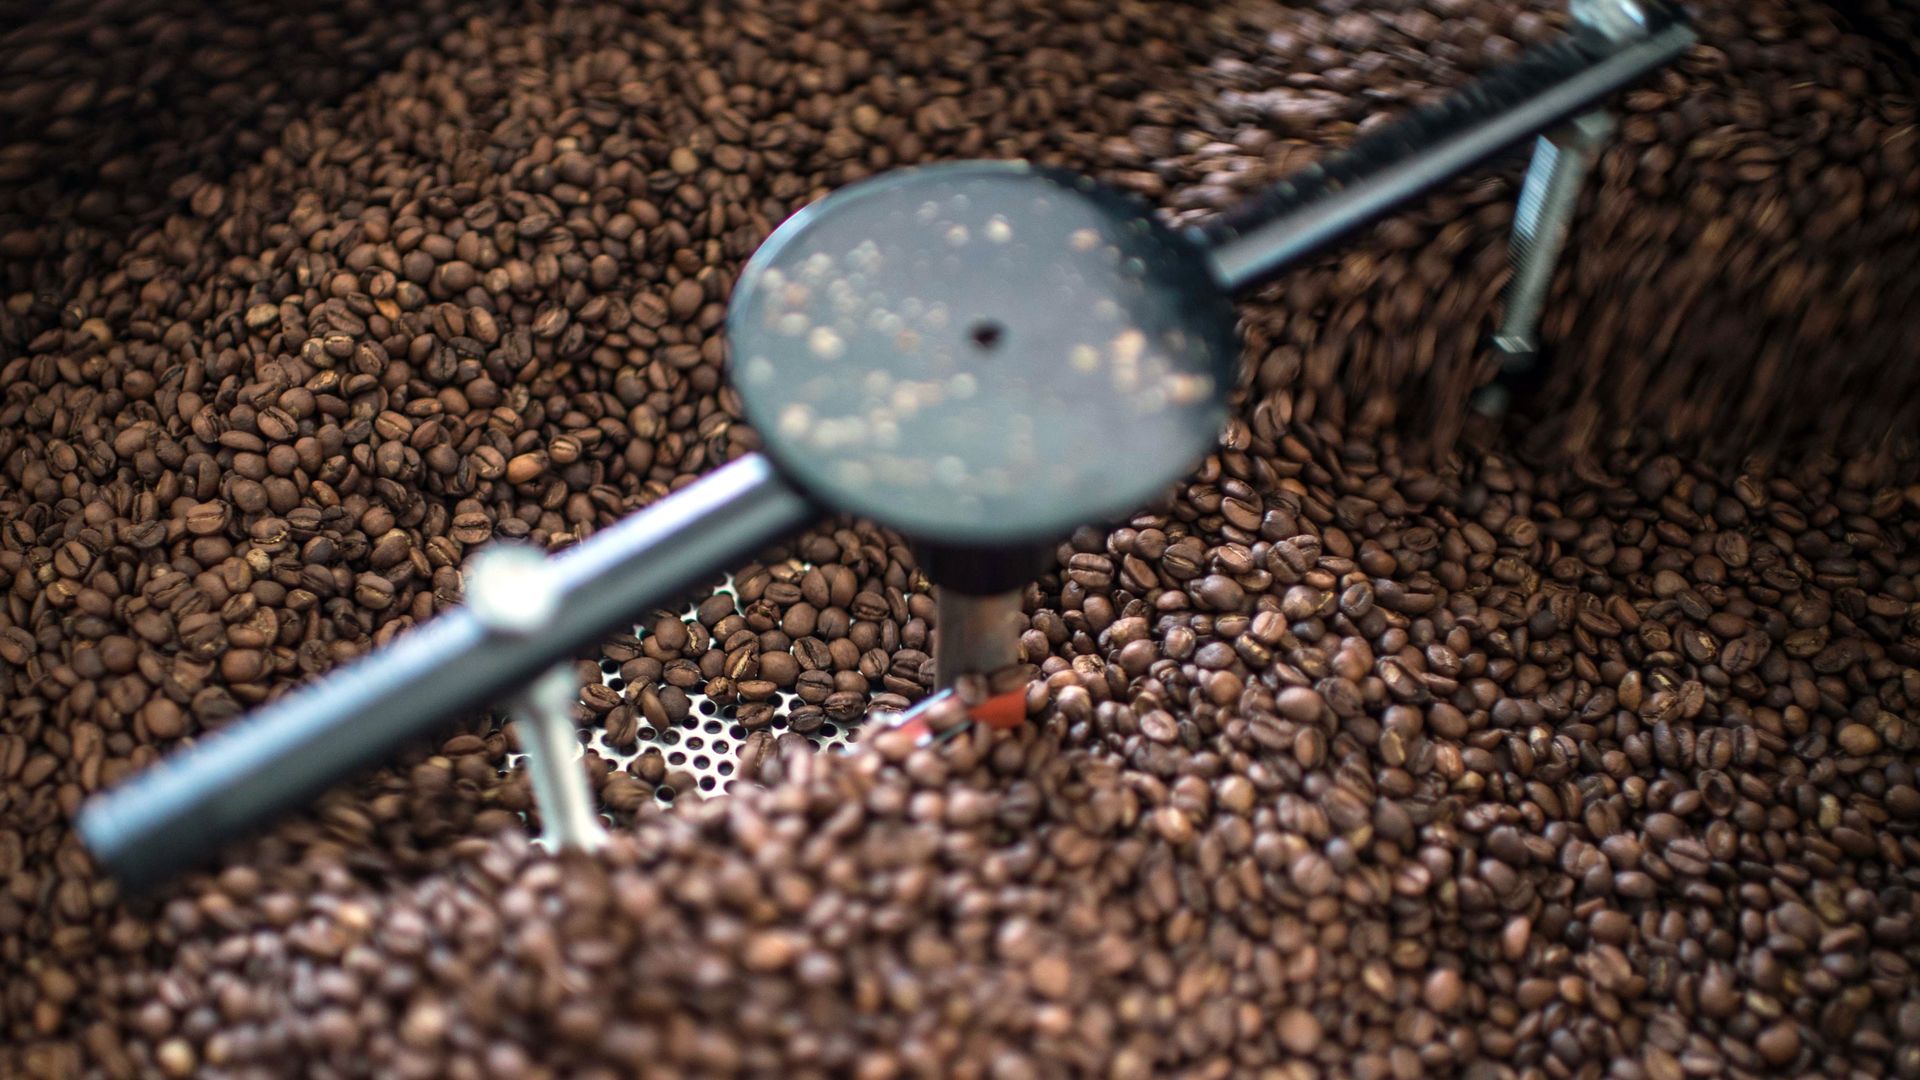 In this image, coffee beans are turned over in a larger container